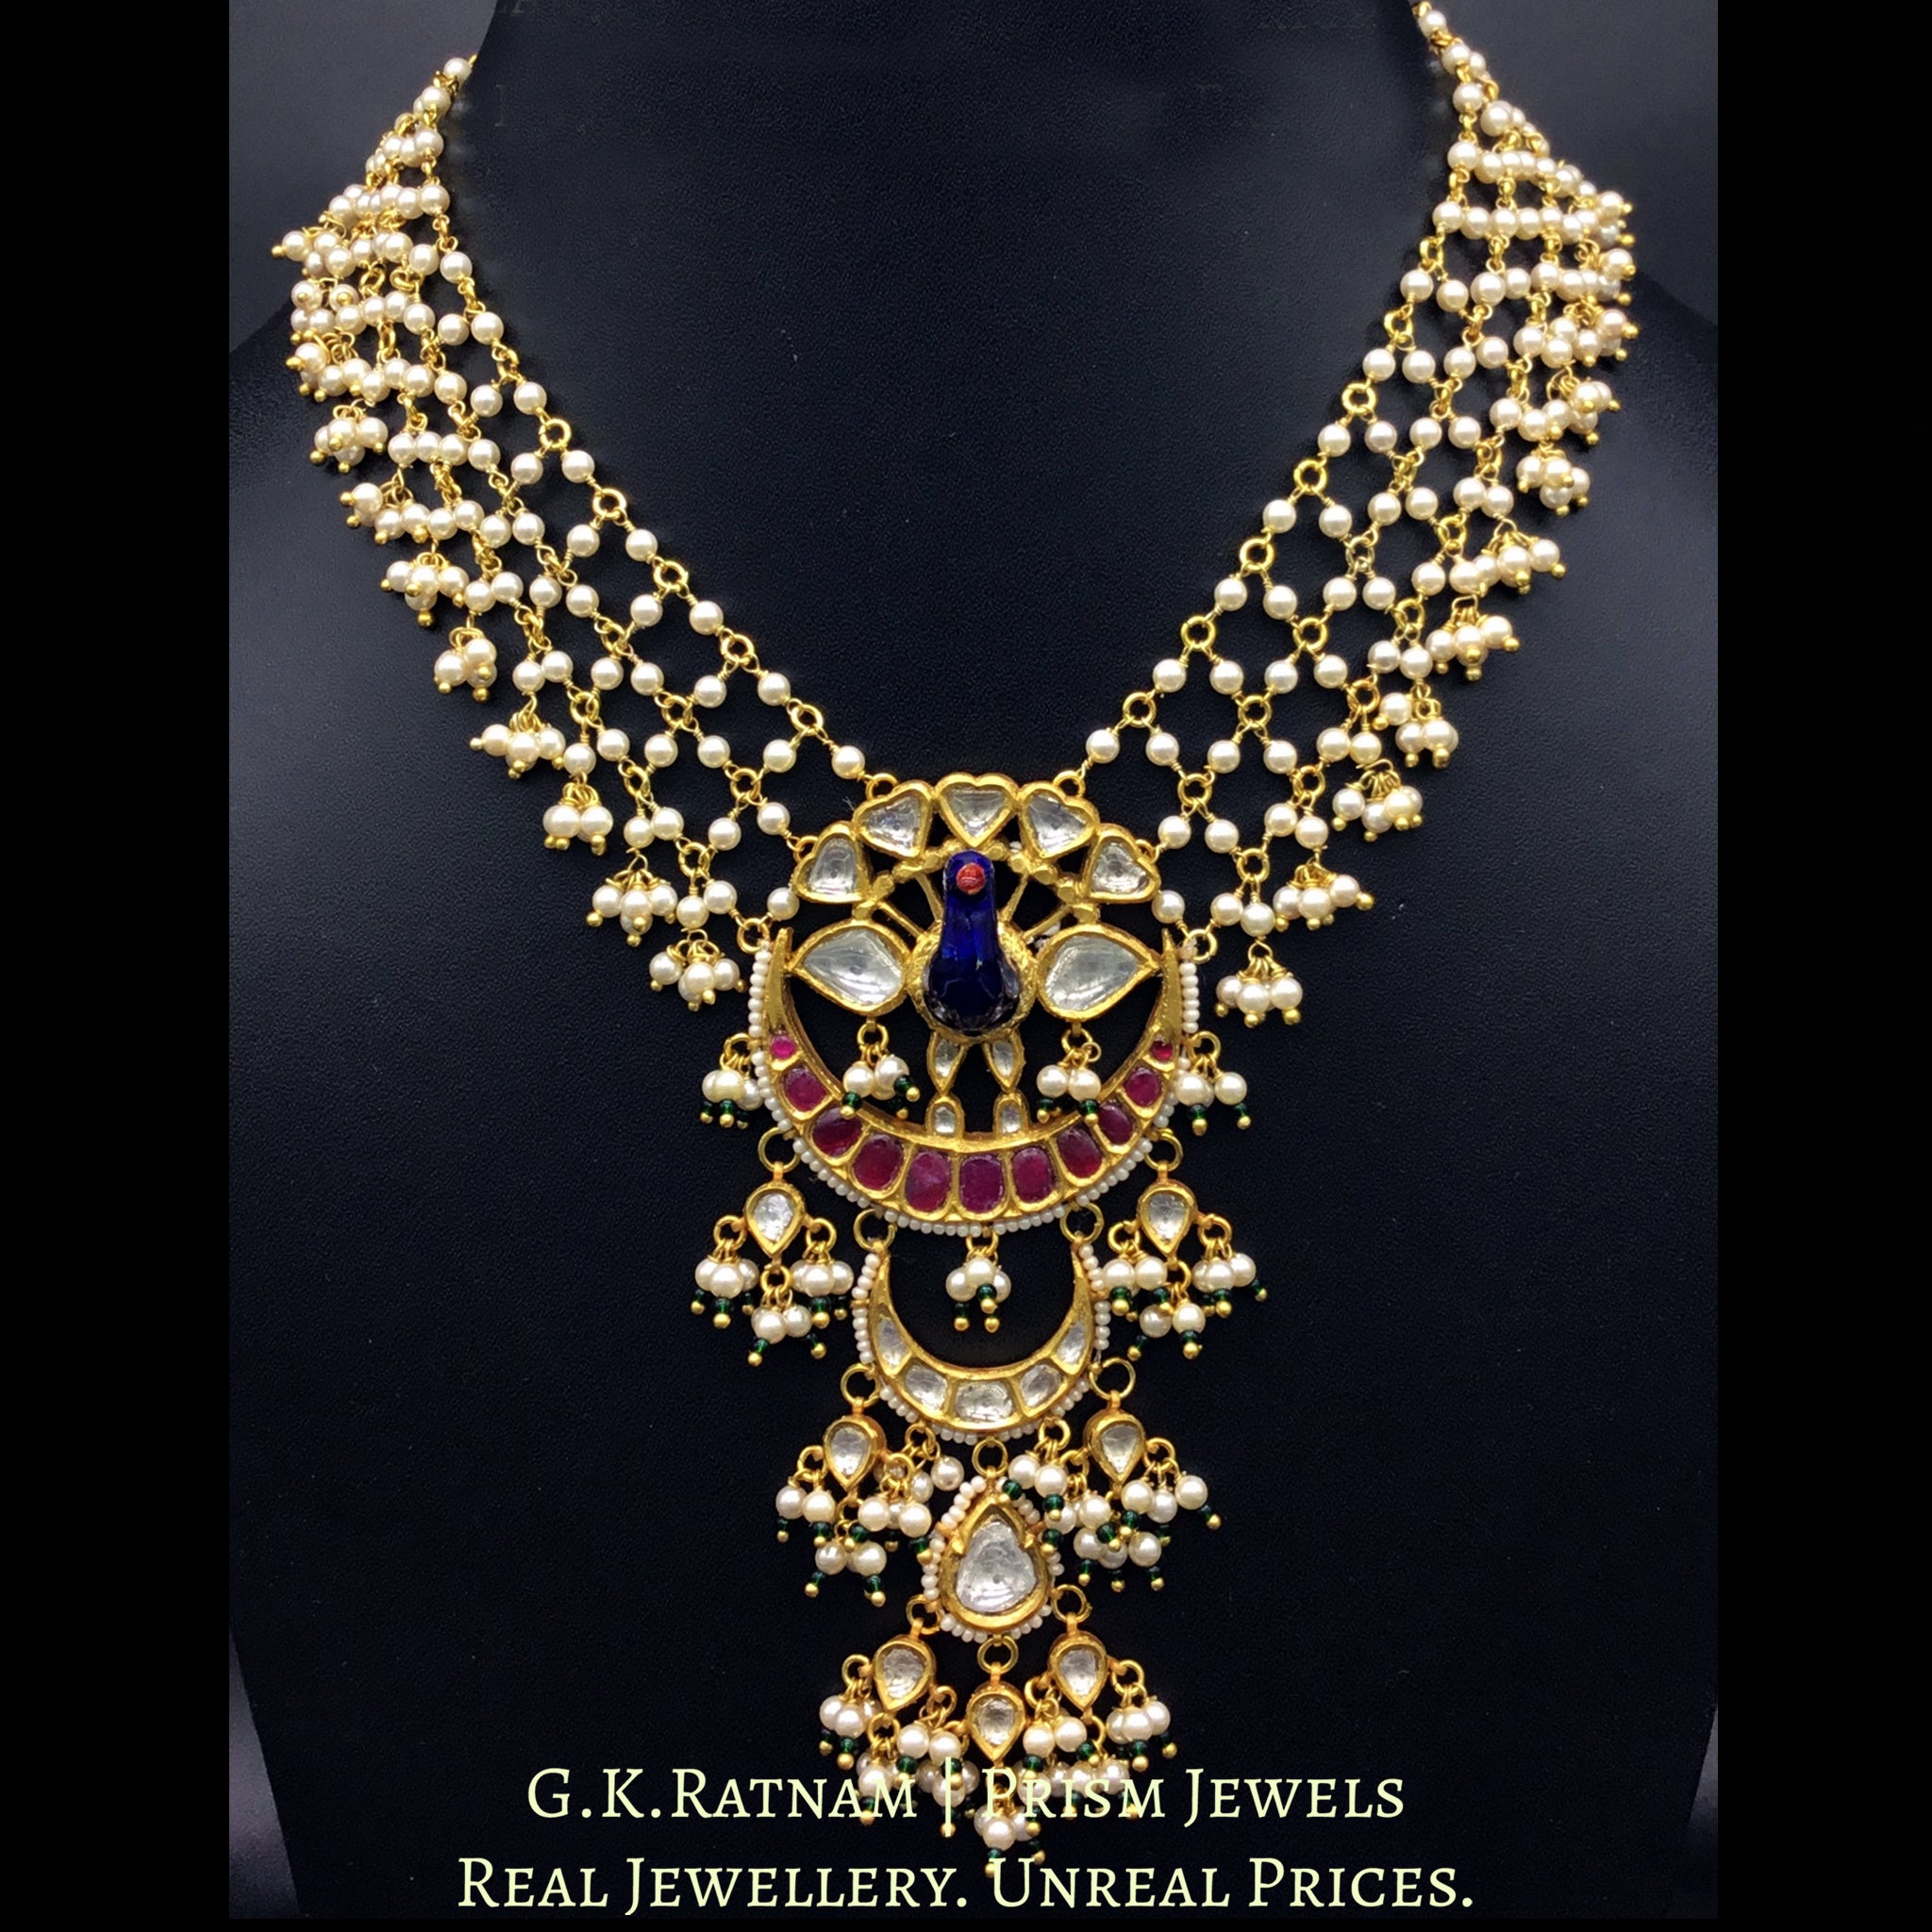 22k Gold and Diamond Polki Peacock Pendant with lustrous pearls strung in a mesh